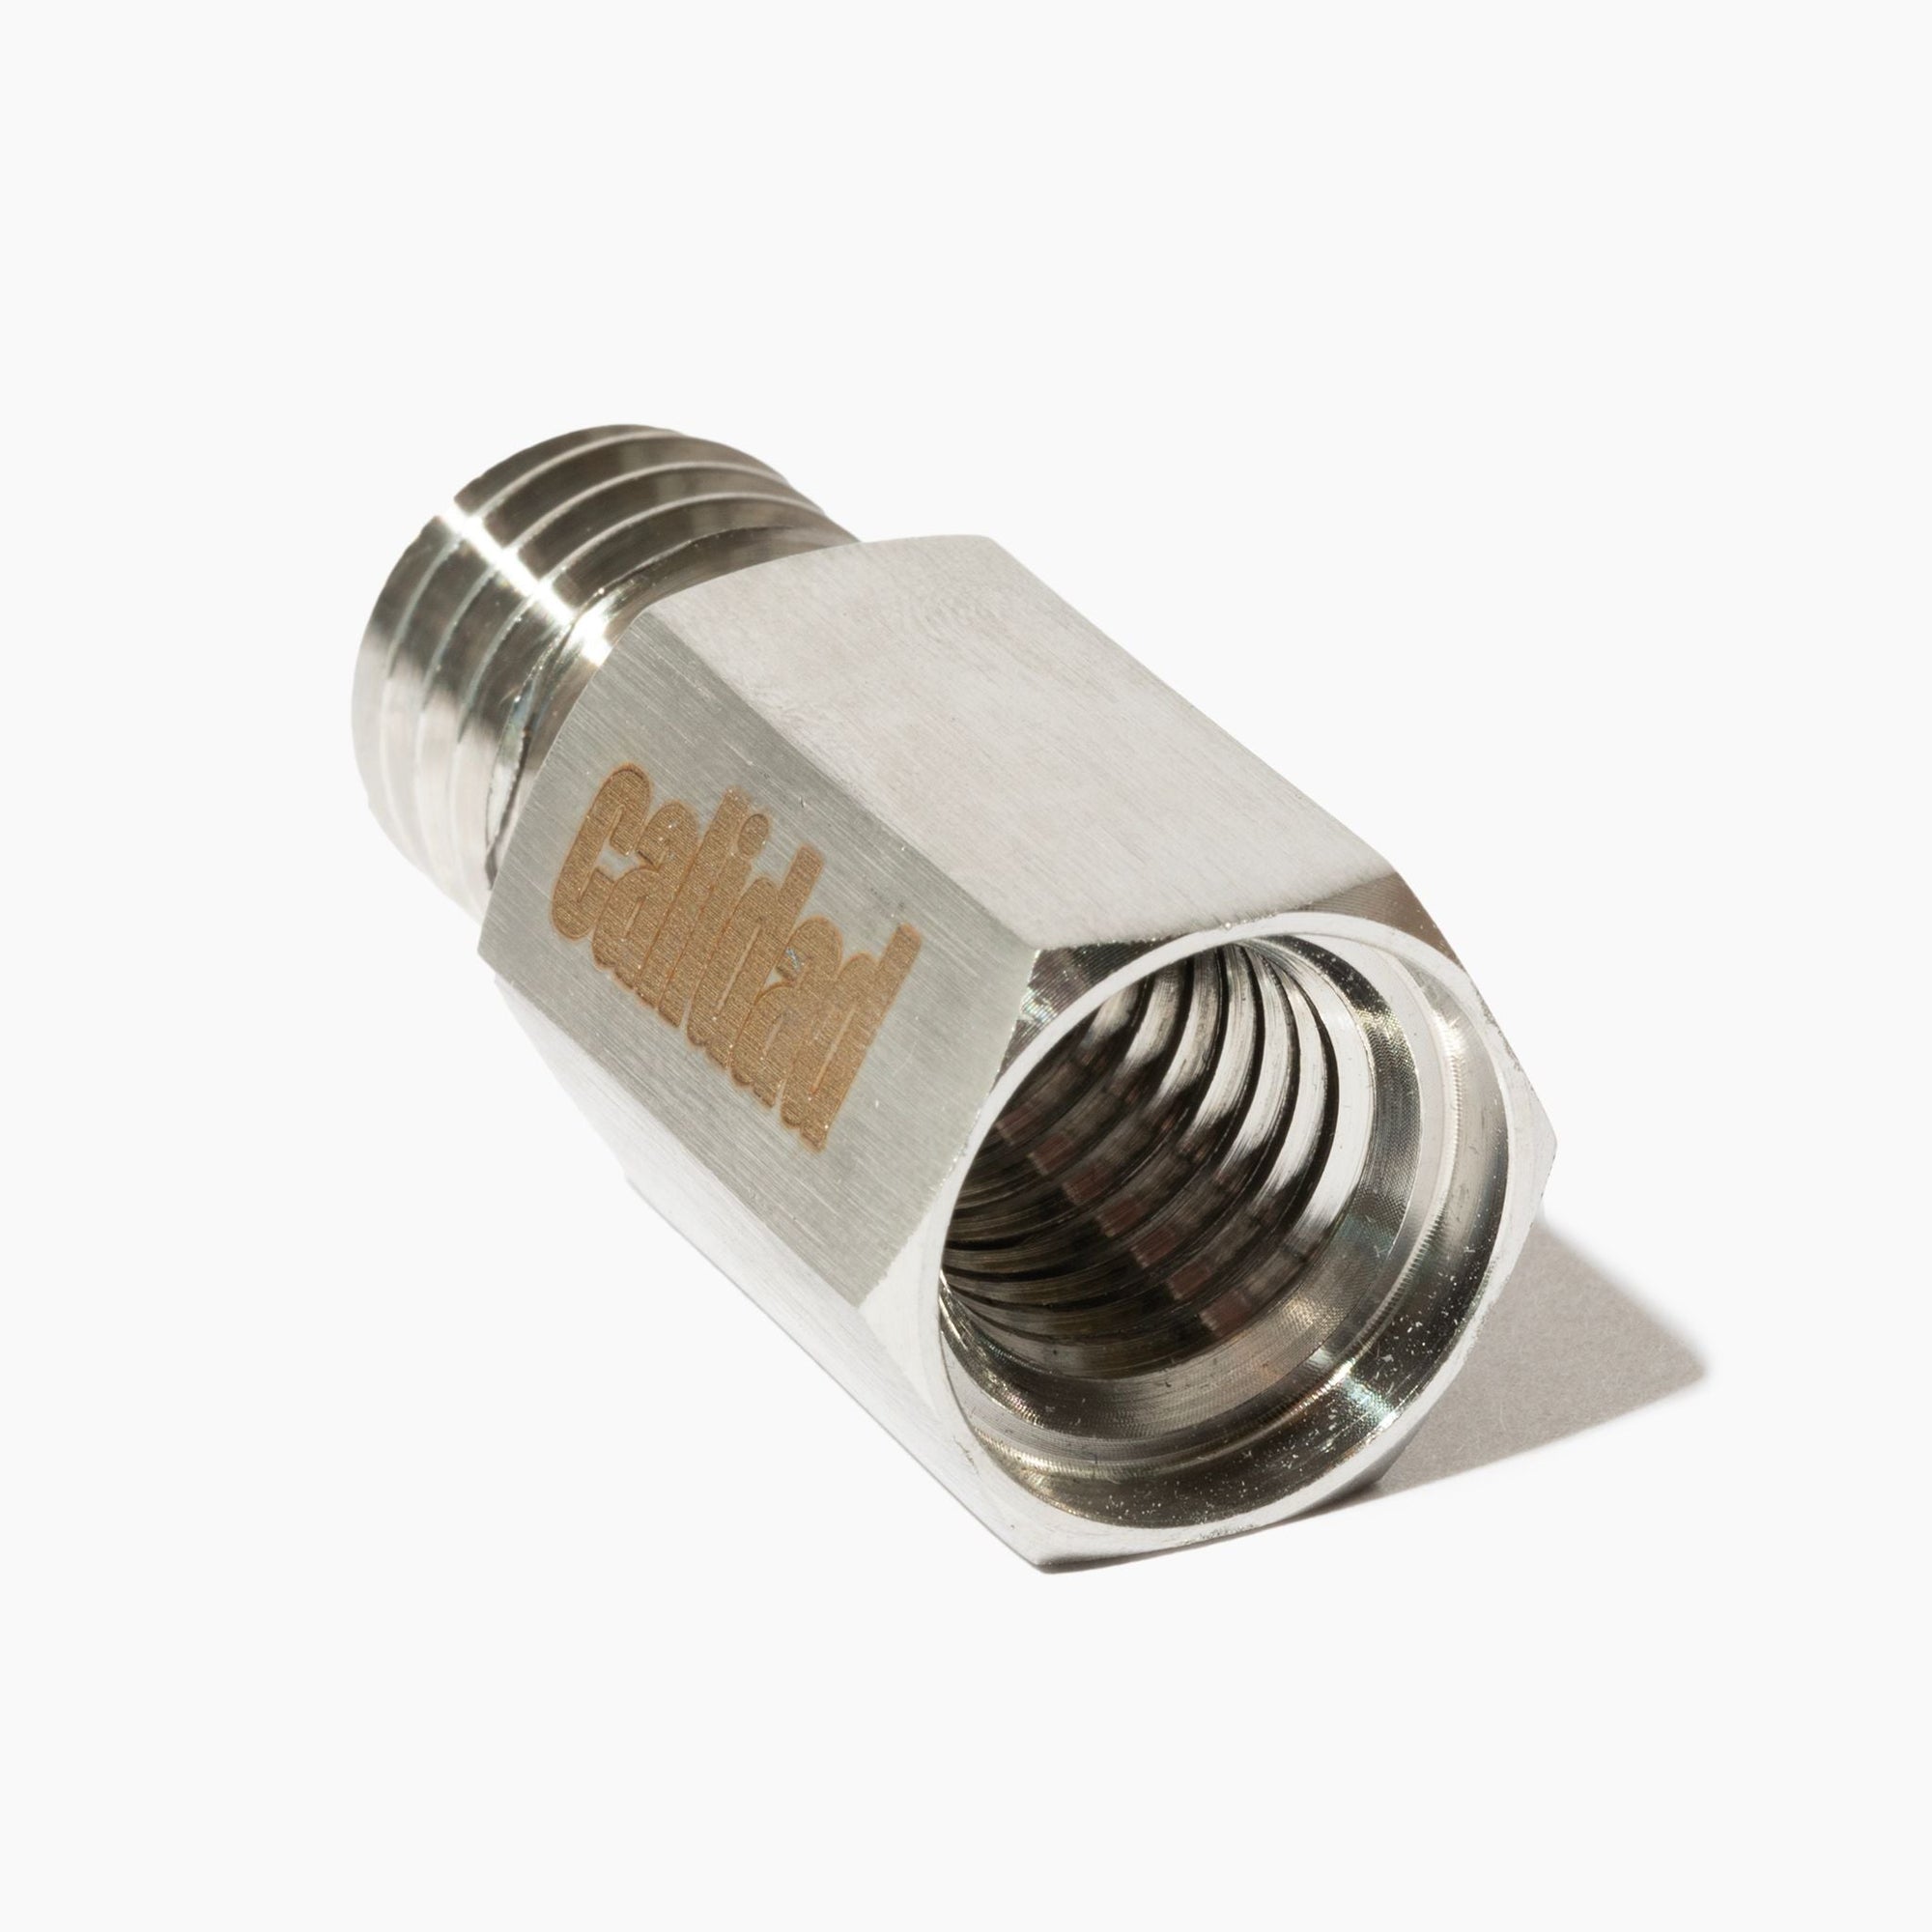 The adapter converts your M14 arbor to 5/8"-11 threaded hub for 5/8"-11 male threaded connector